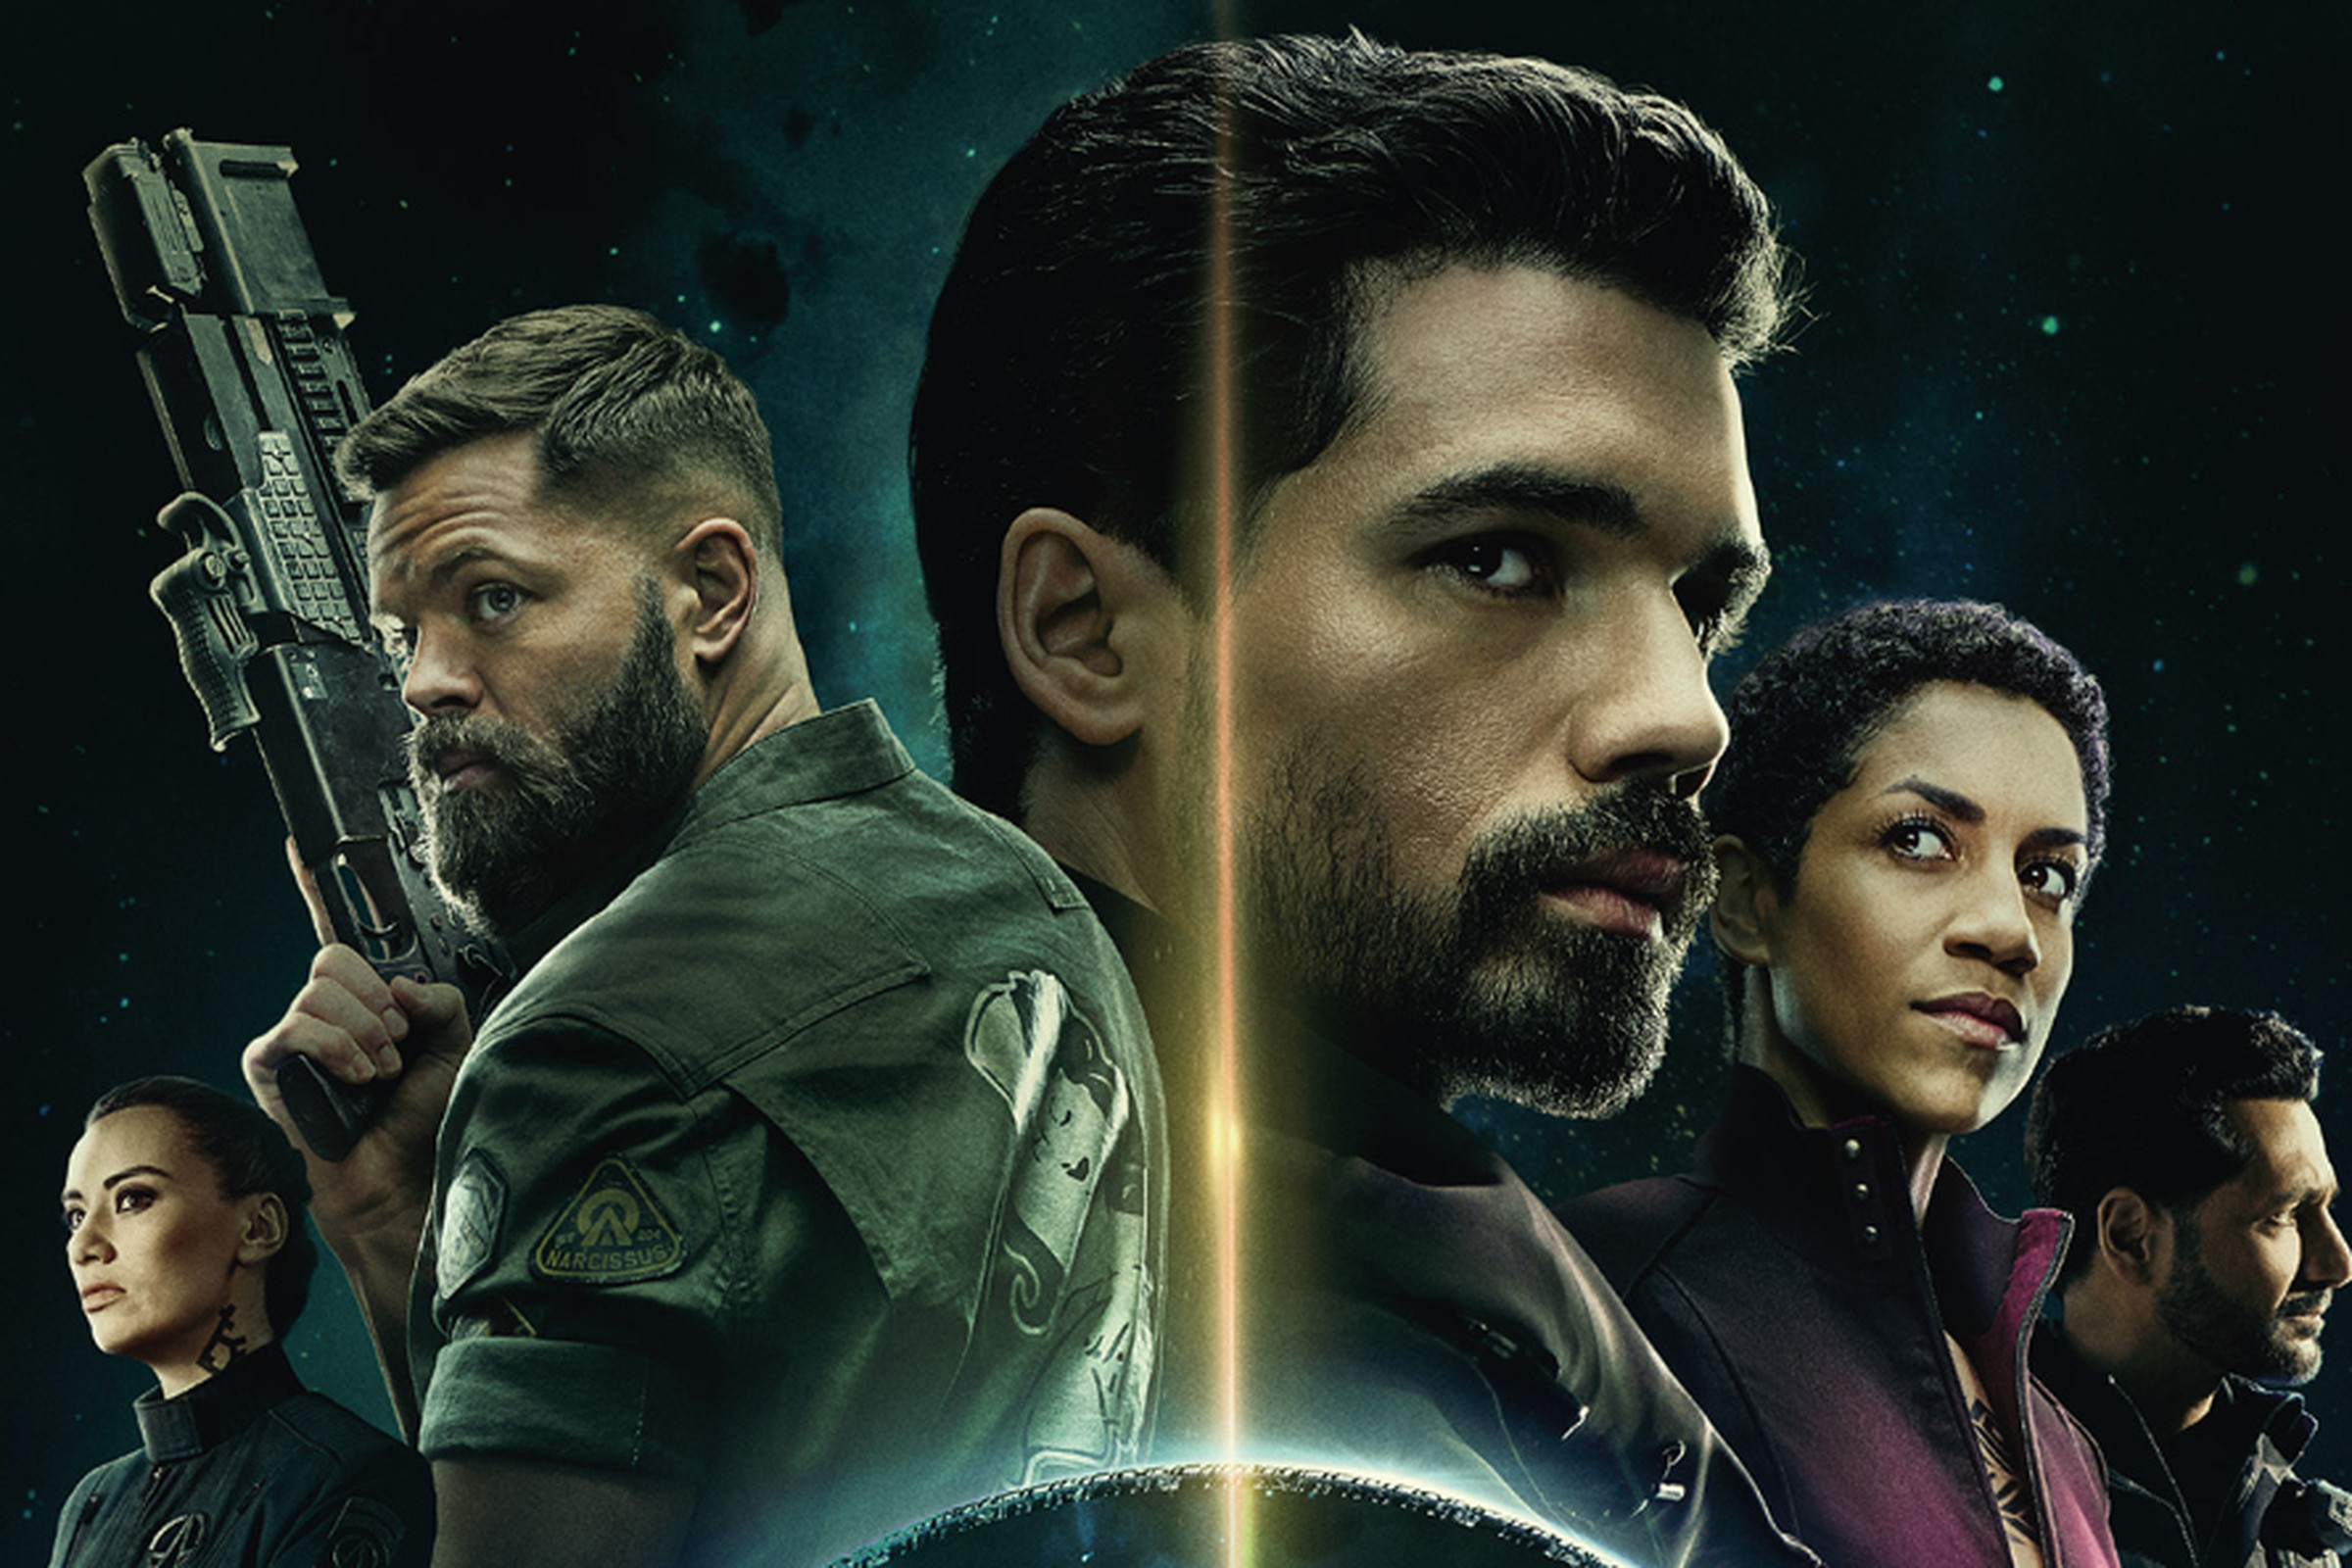 Promotional images for The Expanse, featuring Drummer, Amos, Holden, Naomi, and Alex.